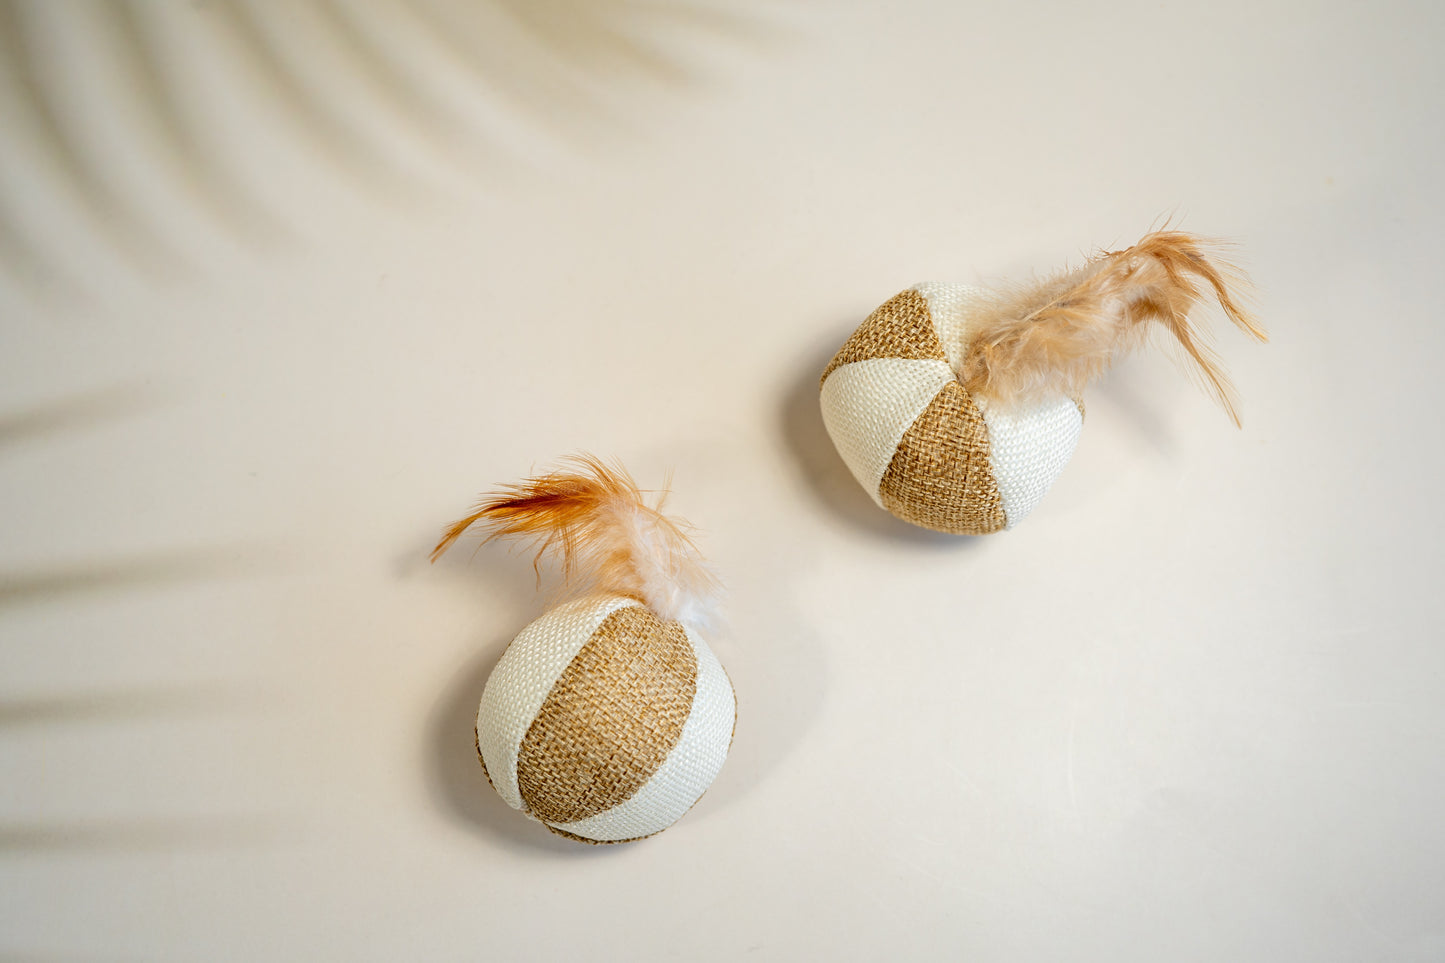 Natural looking cat balls with feathers on top and neutral colors.